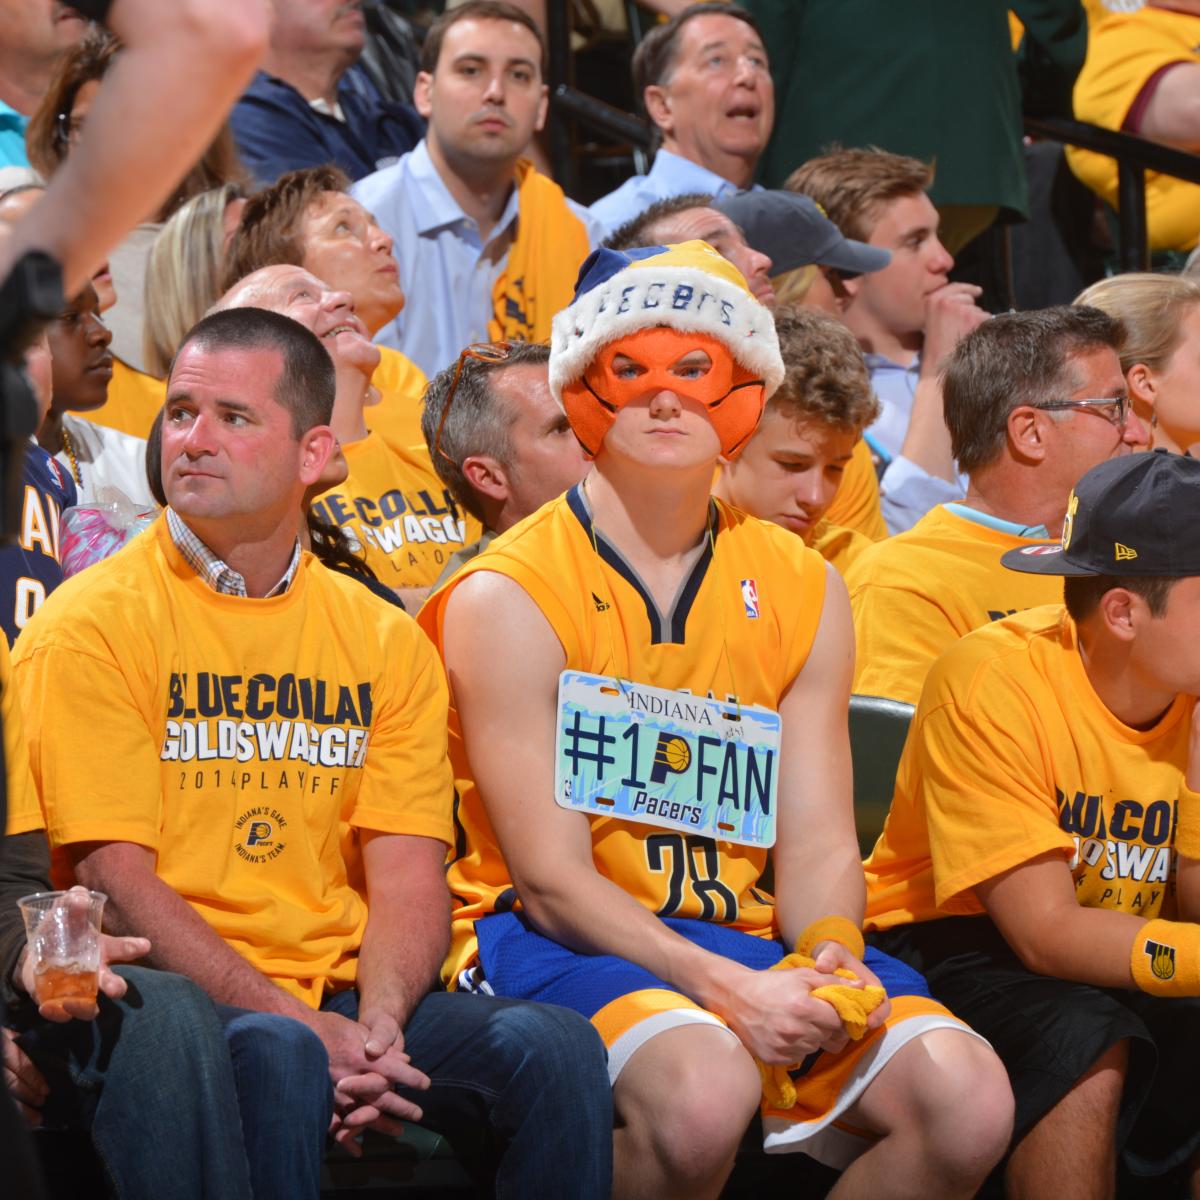 Pacers Fans Can Get Playoff Tickets at Ridiculously Low Prices Ahead of